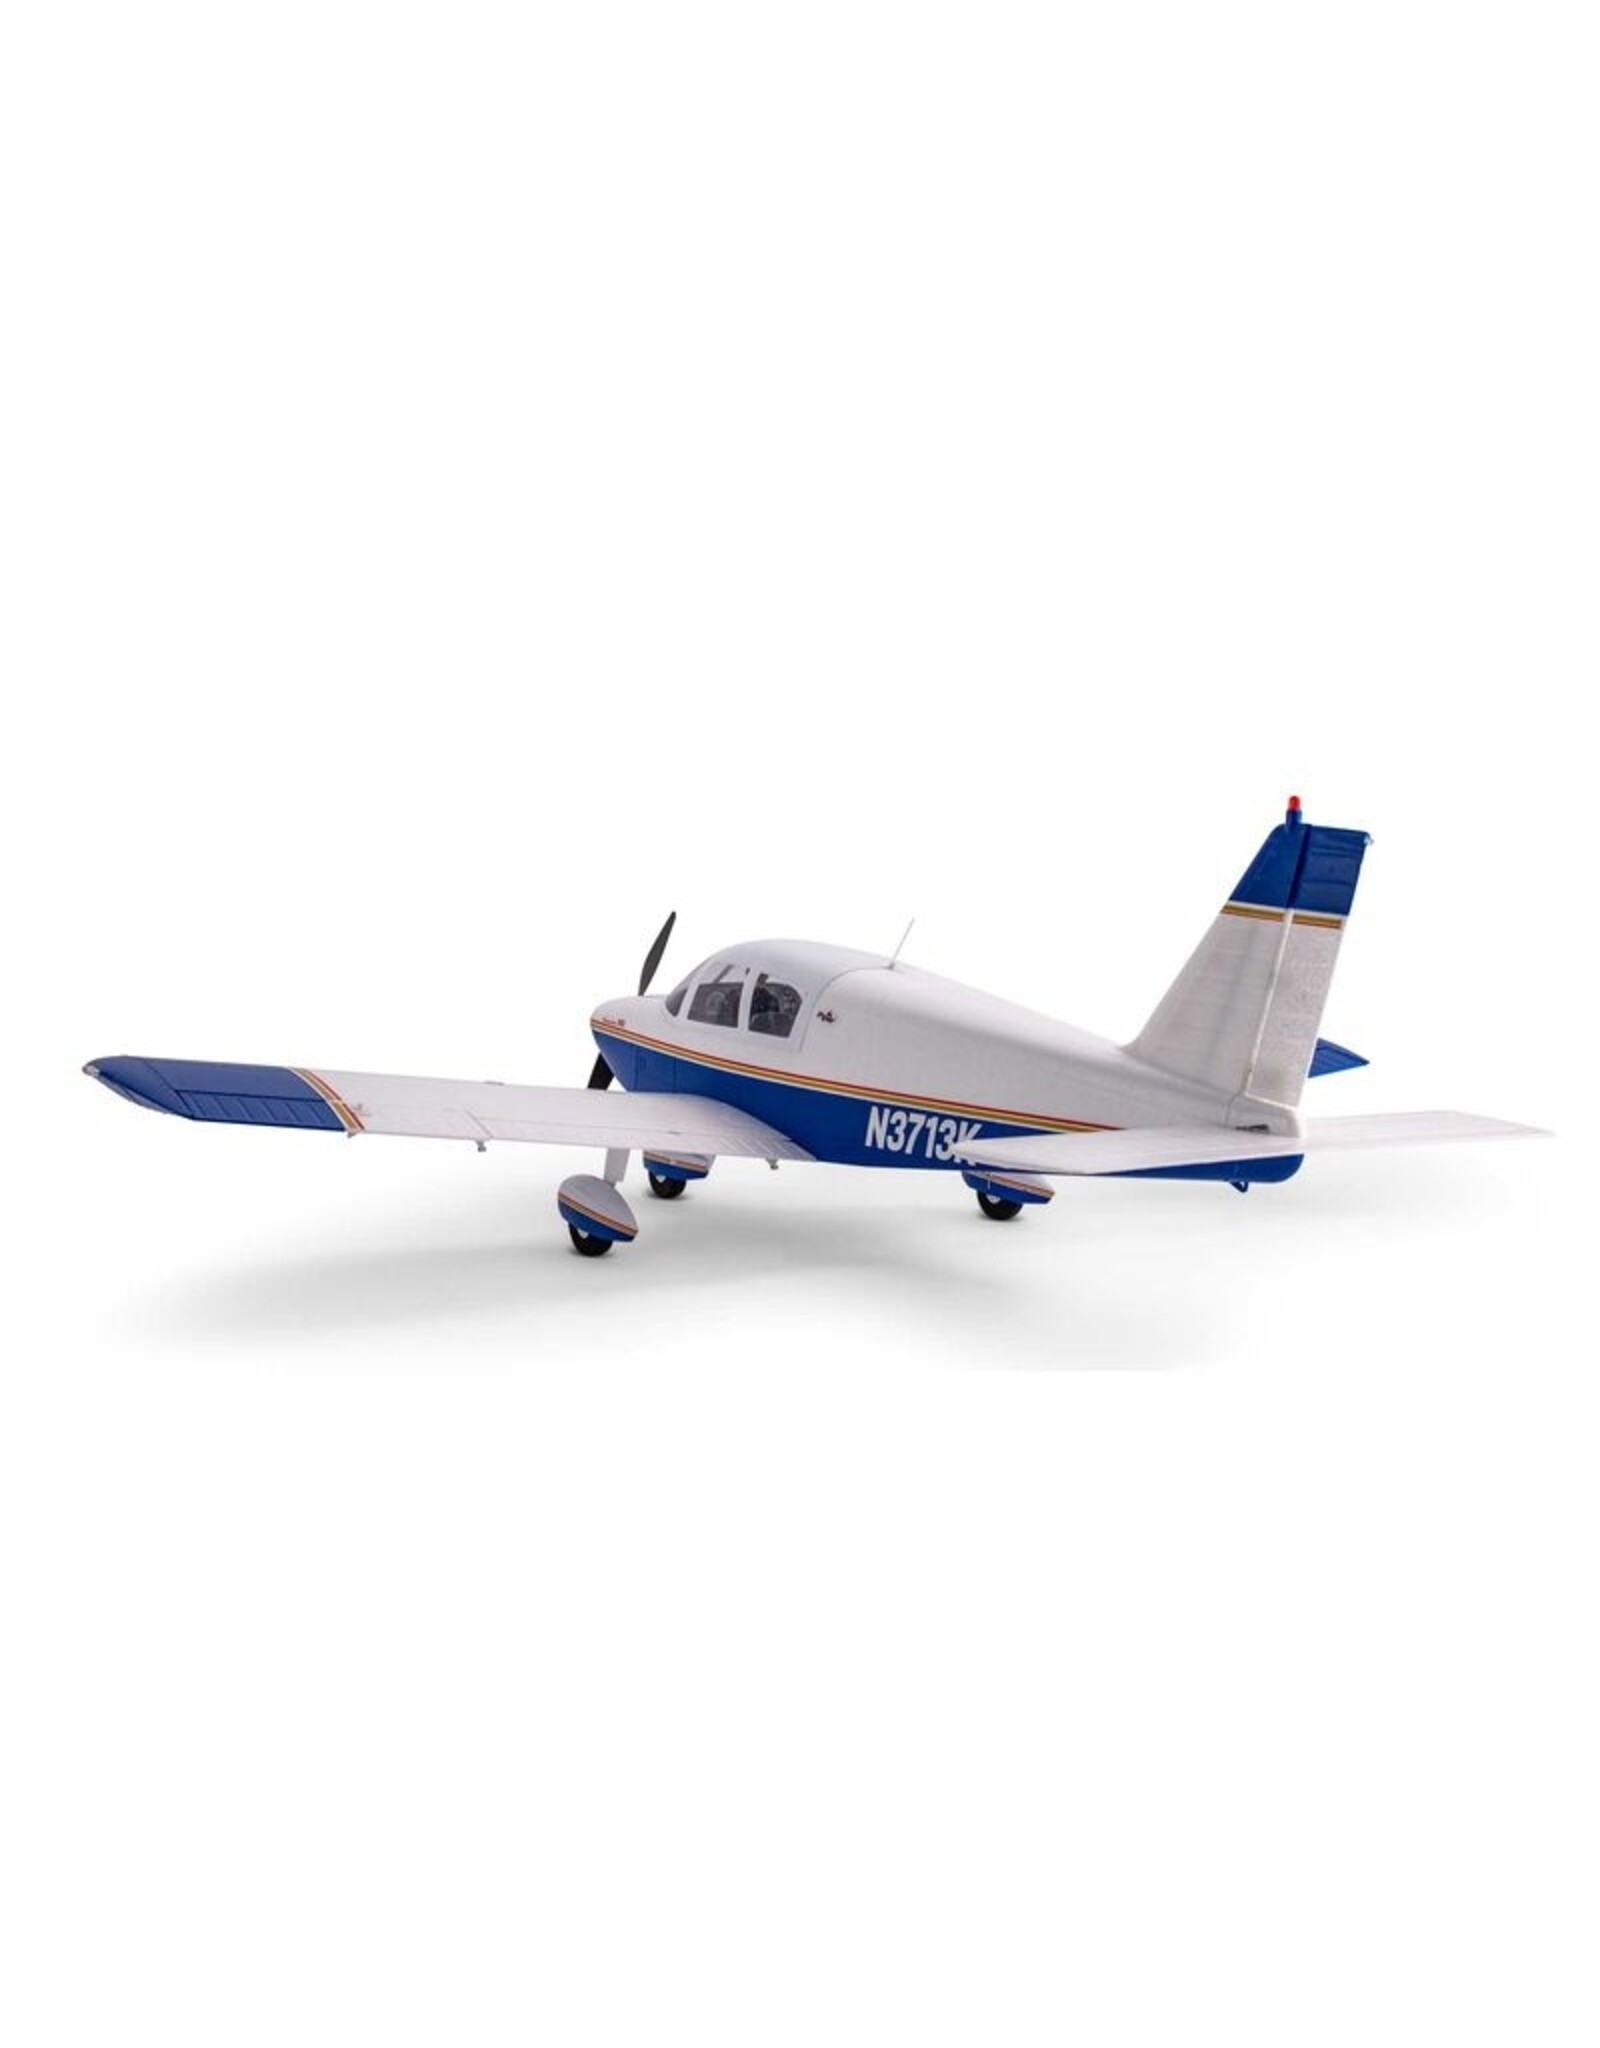 eflite EFL05450 Cherokee 1.3M Blue BNF Basic AS3X and SAFE Select